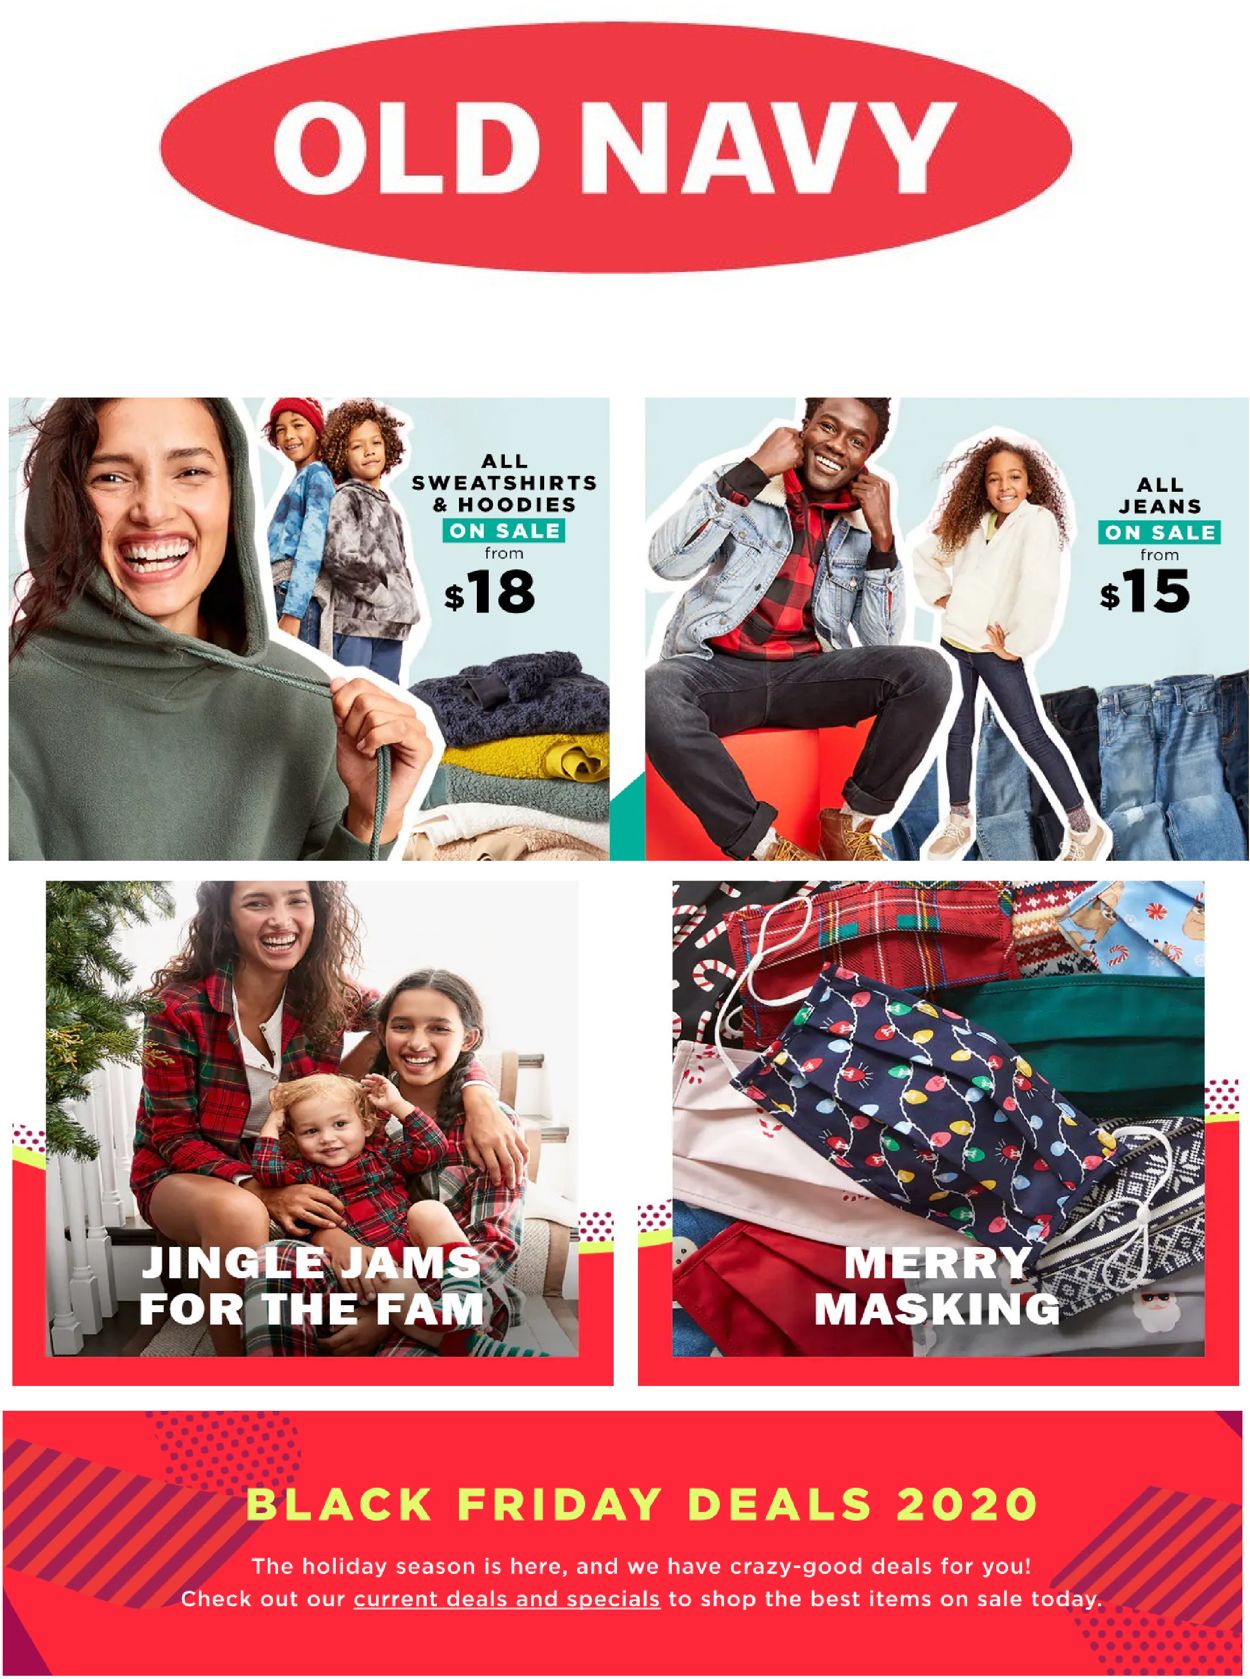 The Target Black Friday Ad For 2015 Is Out — View All 40, 57% OFF